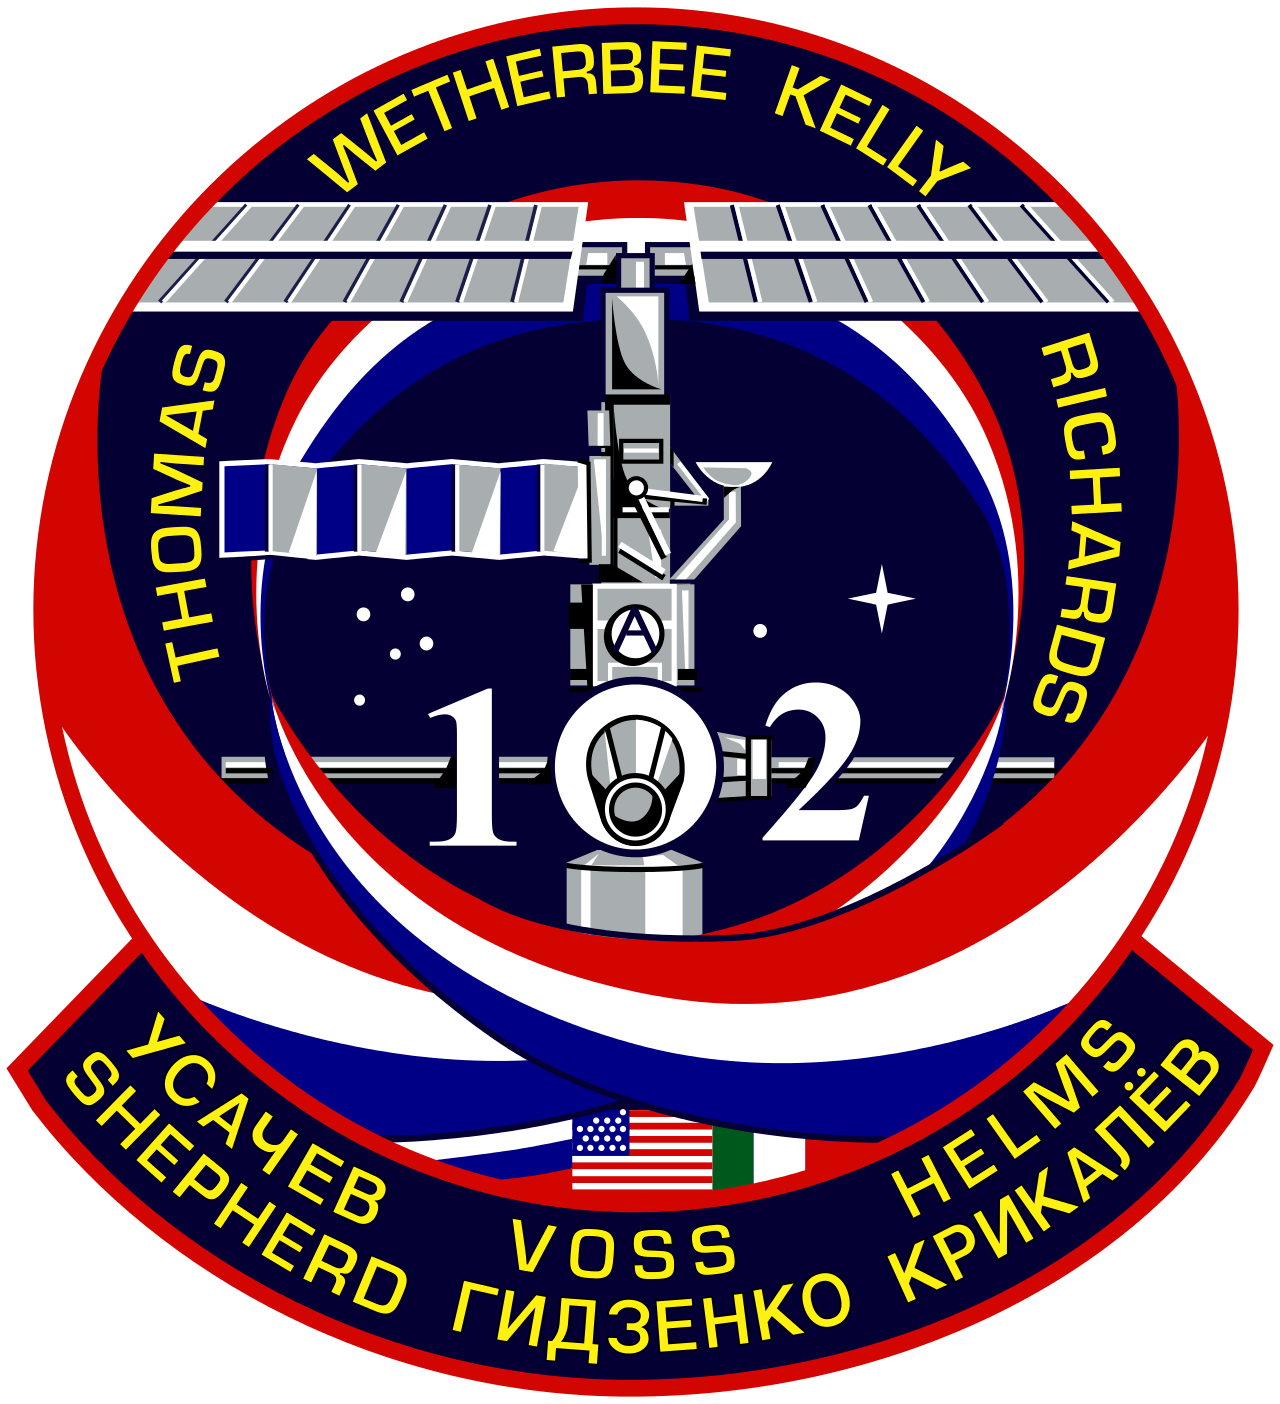 Mission patch for STS-102